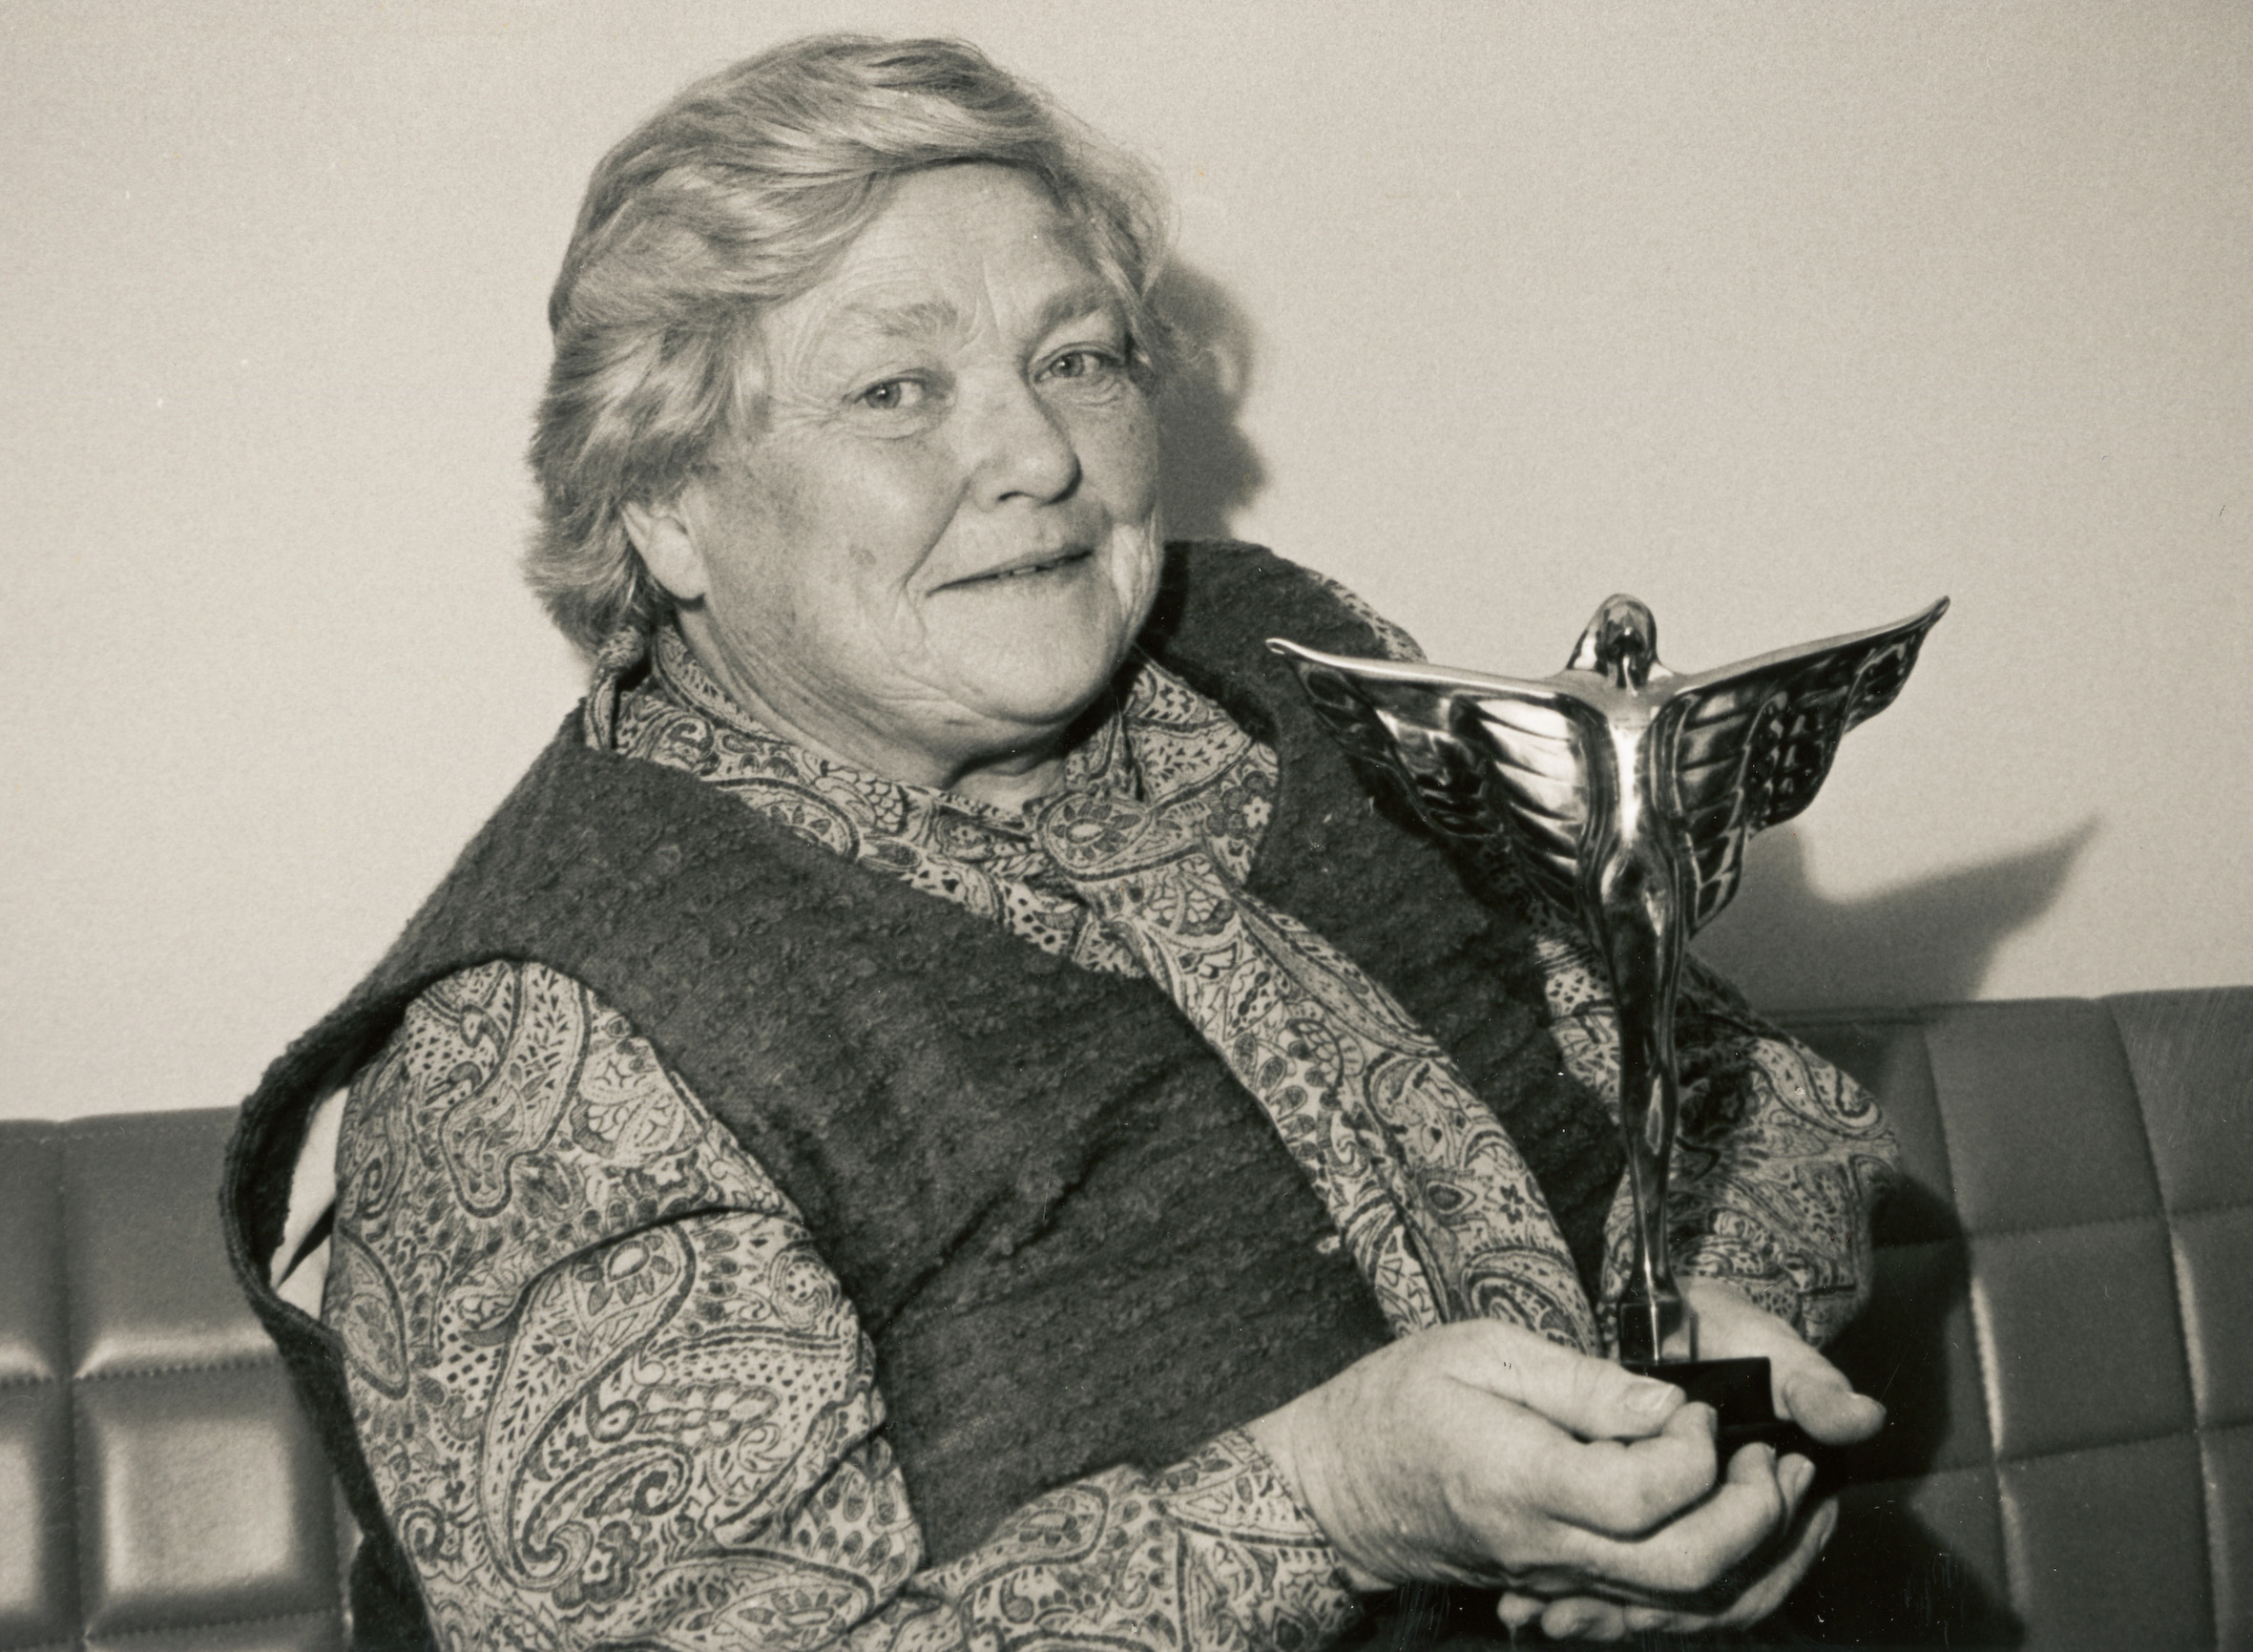 A woman holding a trophy, smiling.